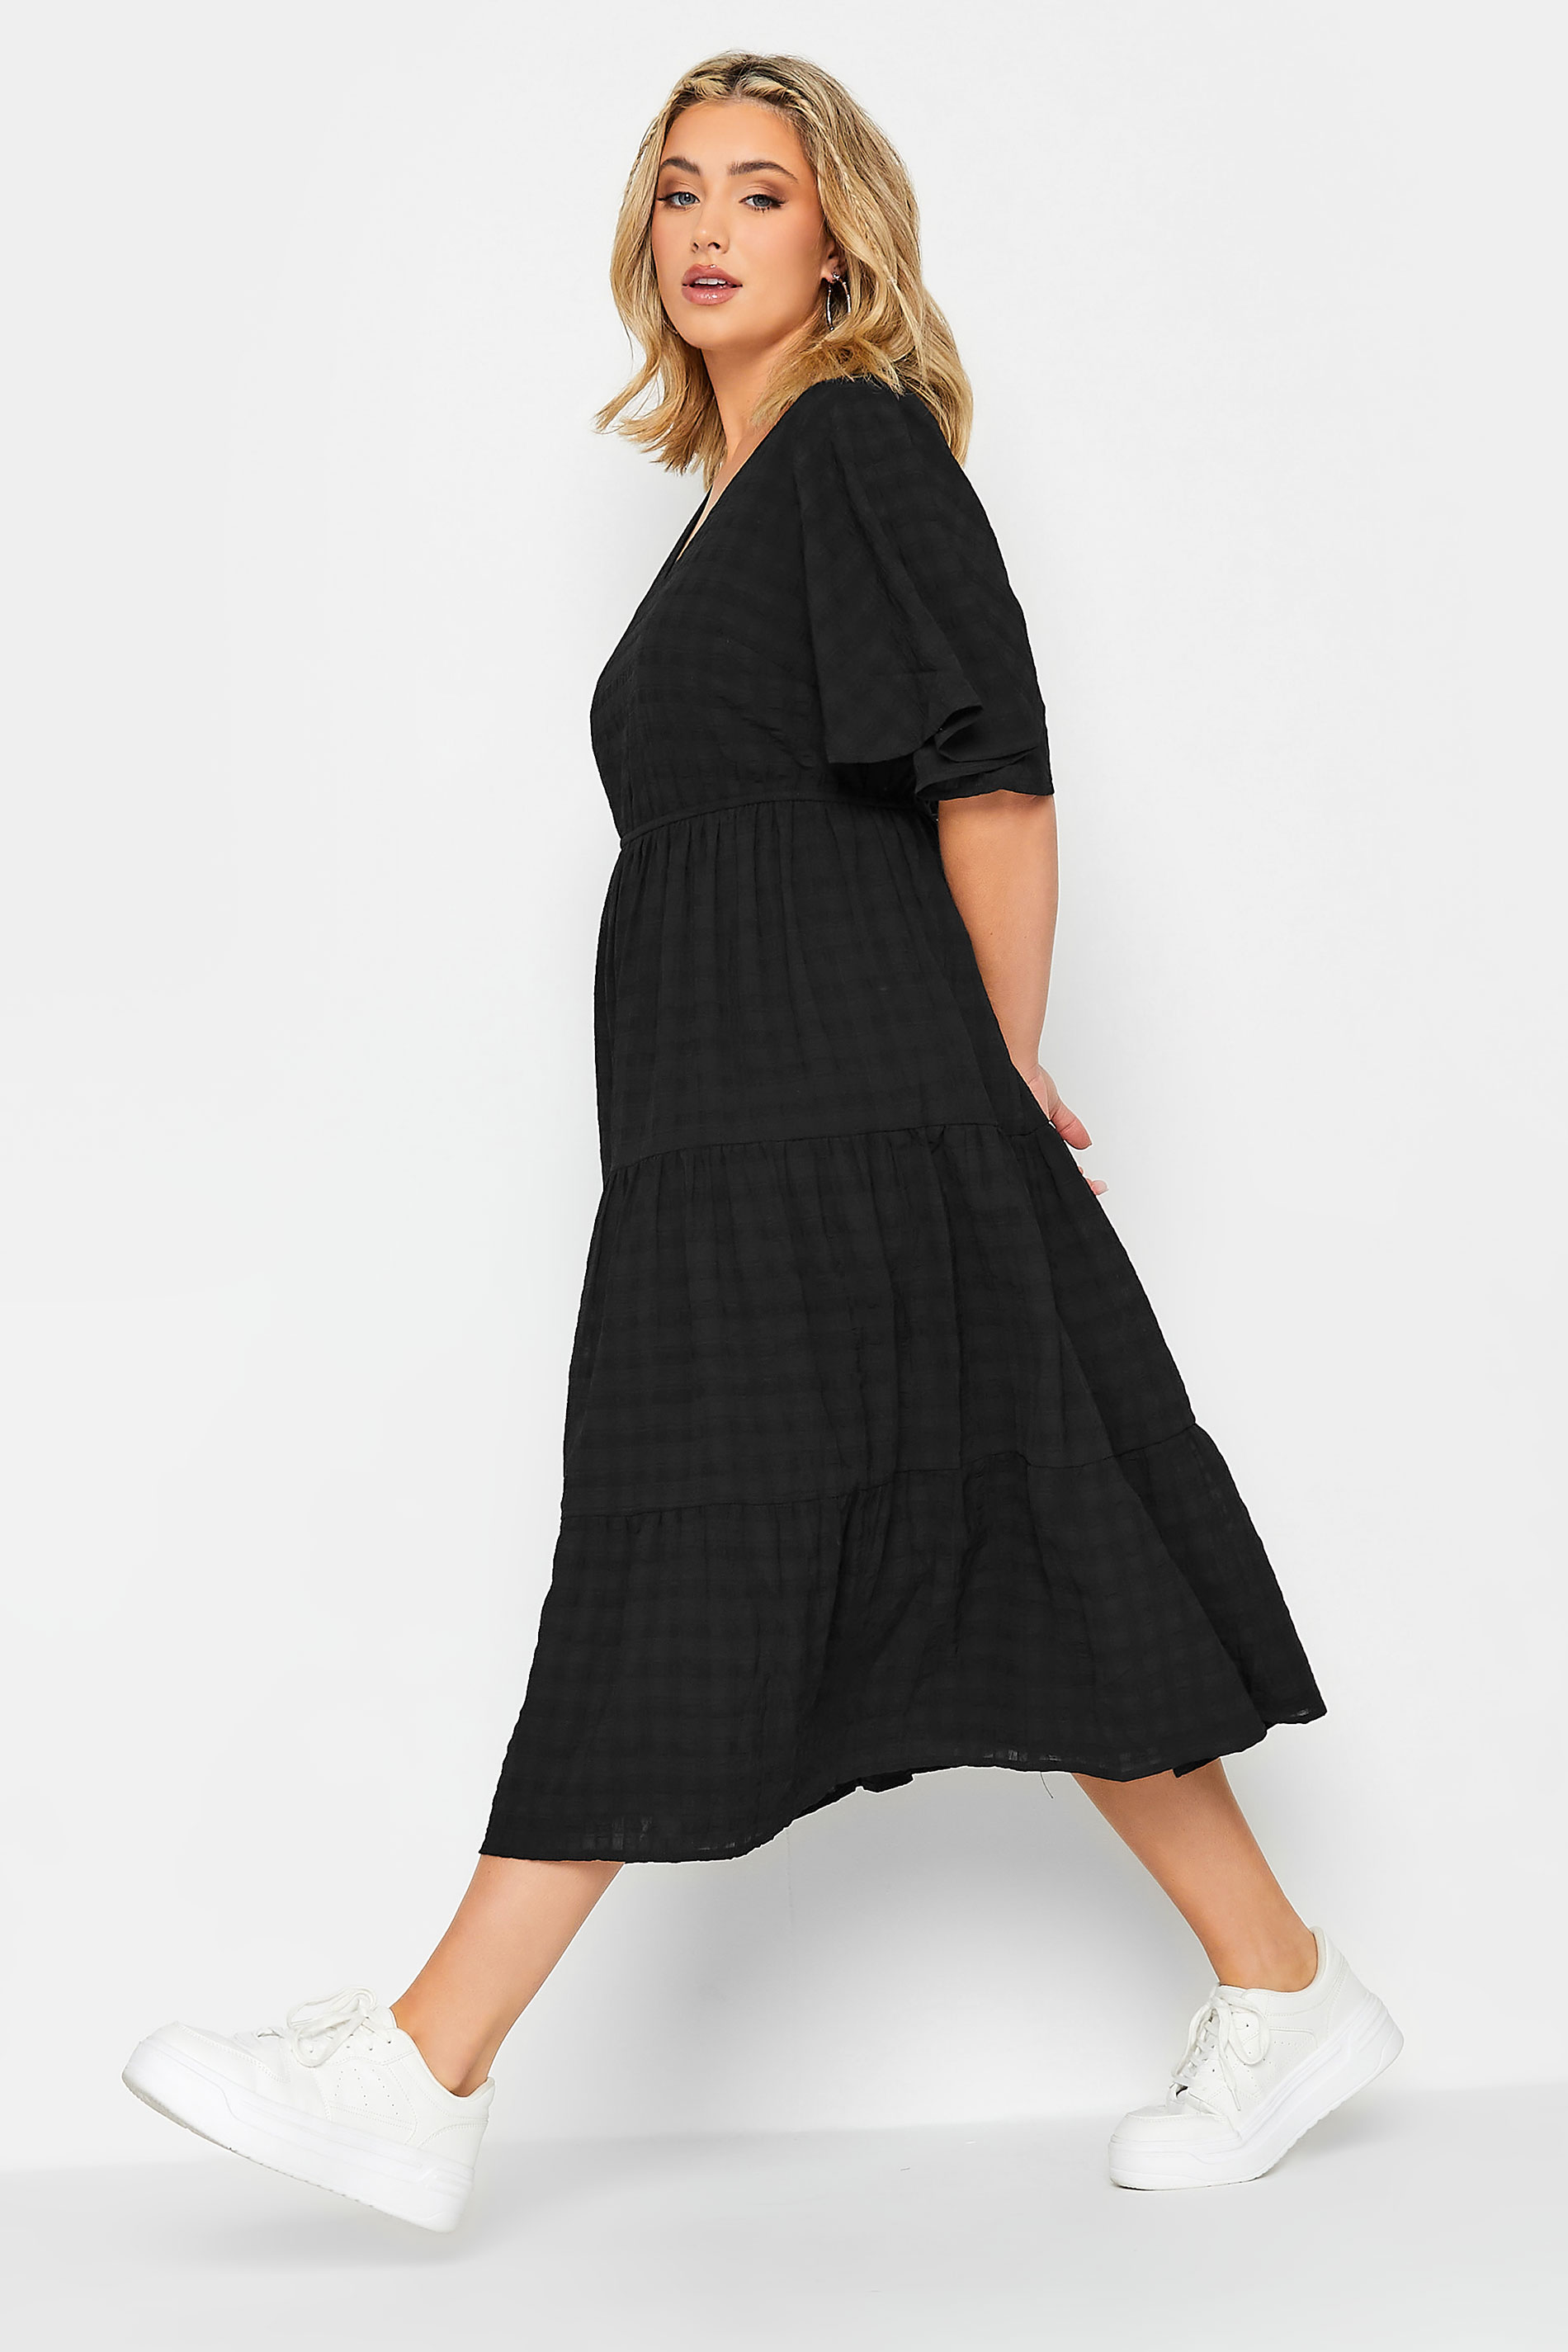 LIMITED COLLECTION Plus Size Black Textured Tiered Smock Dress | Yours Clothing 2